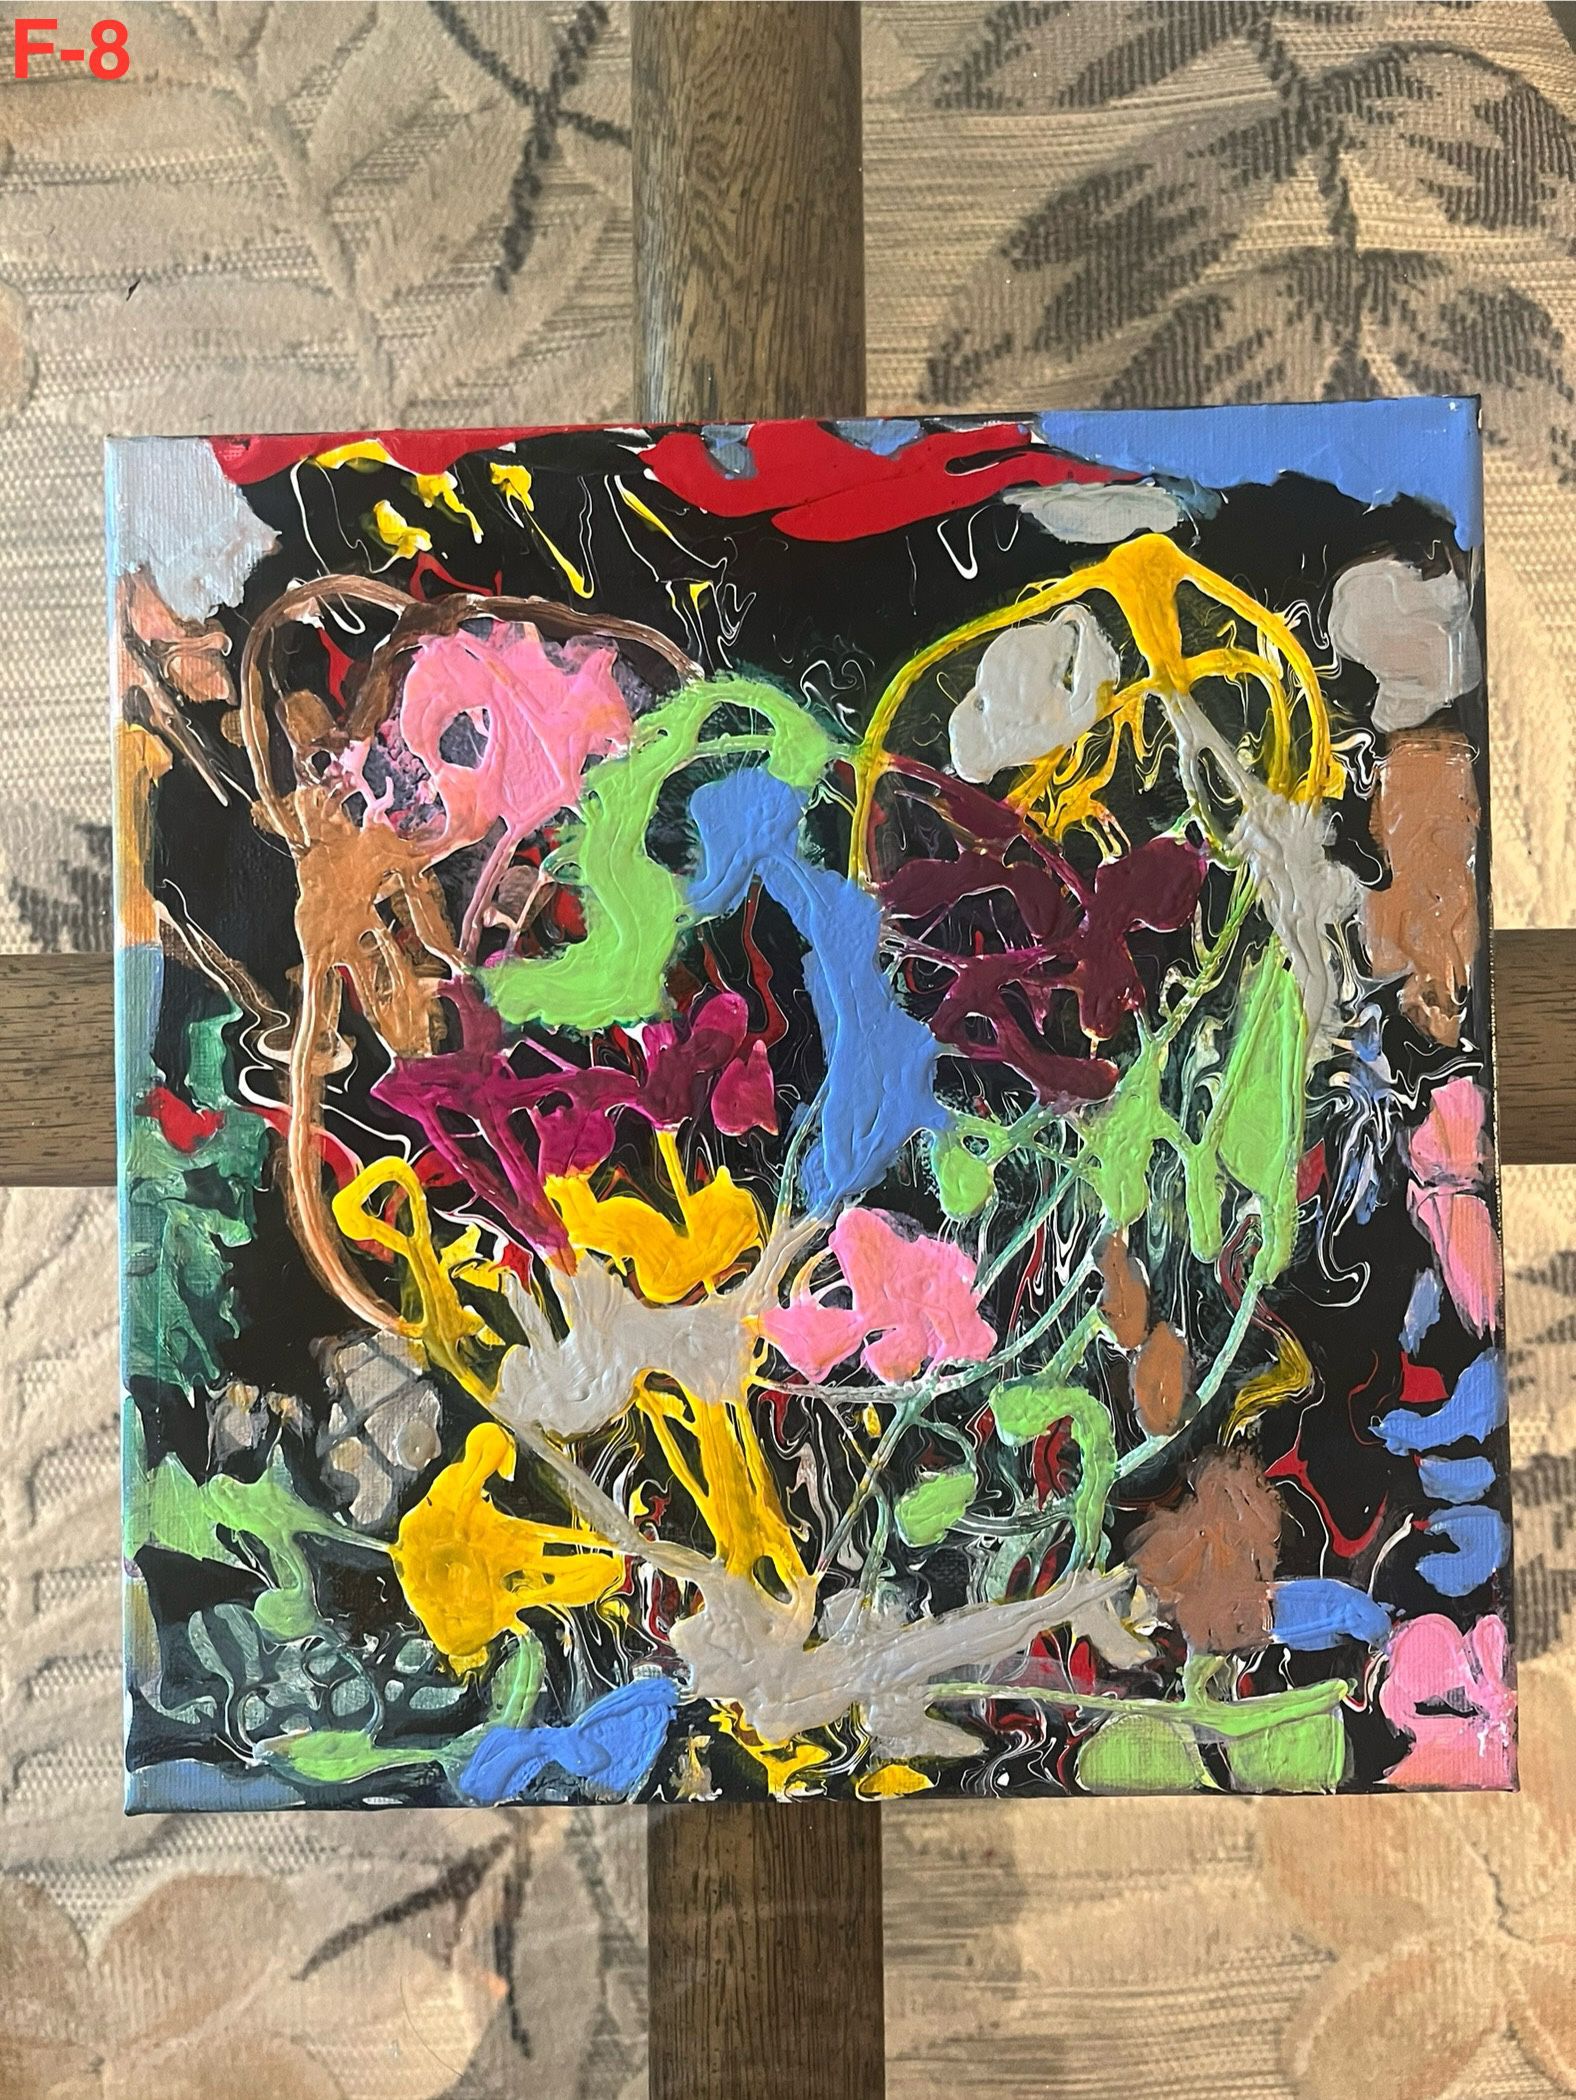 ABSTRACT ACRYLIC PAINTING (F-08)